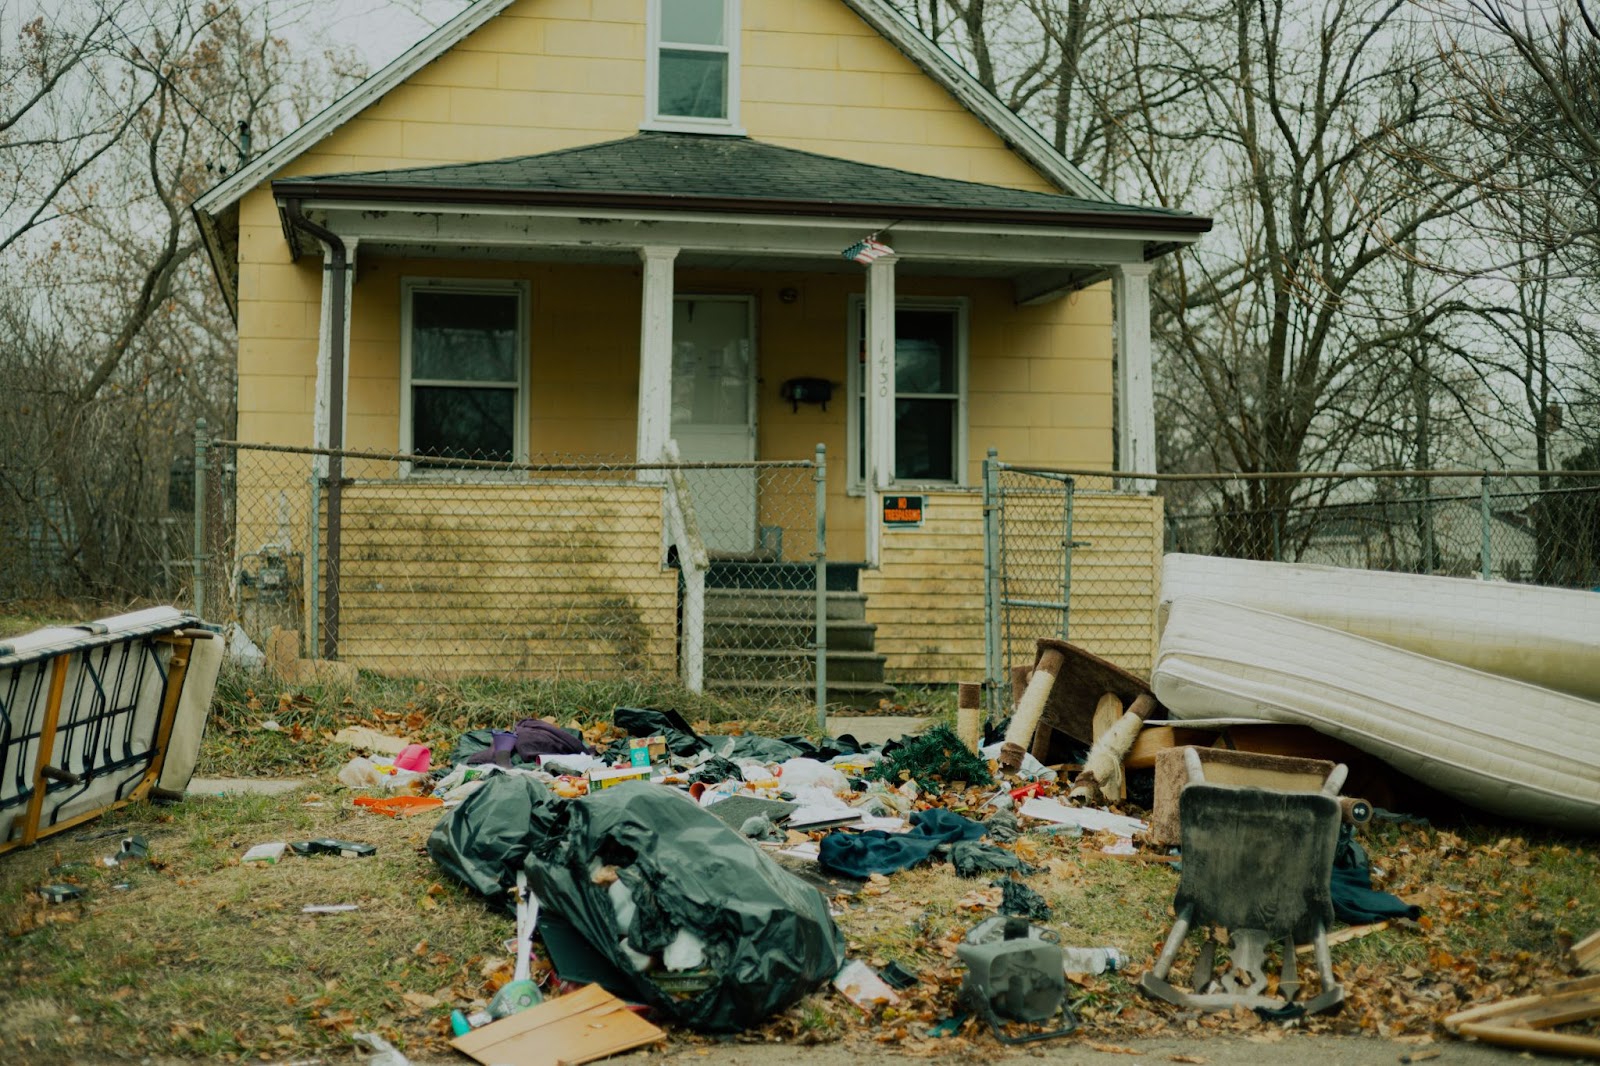 single family, 1.5 story abandoned yellow house with ton of trash in the front yard 